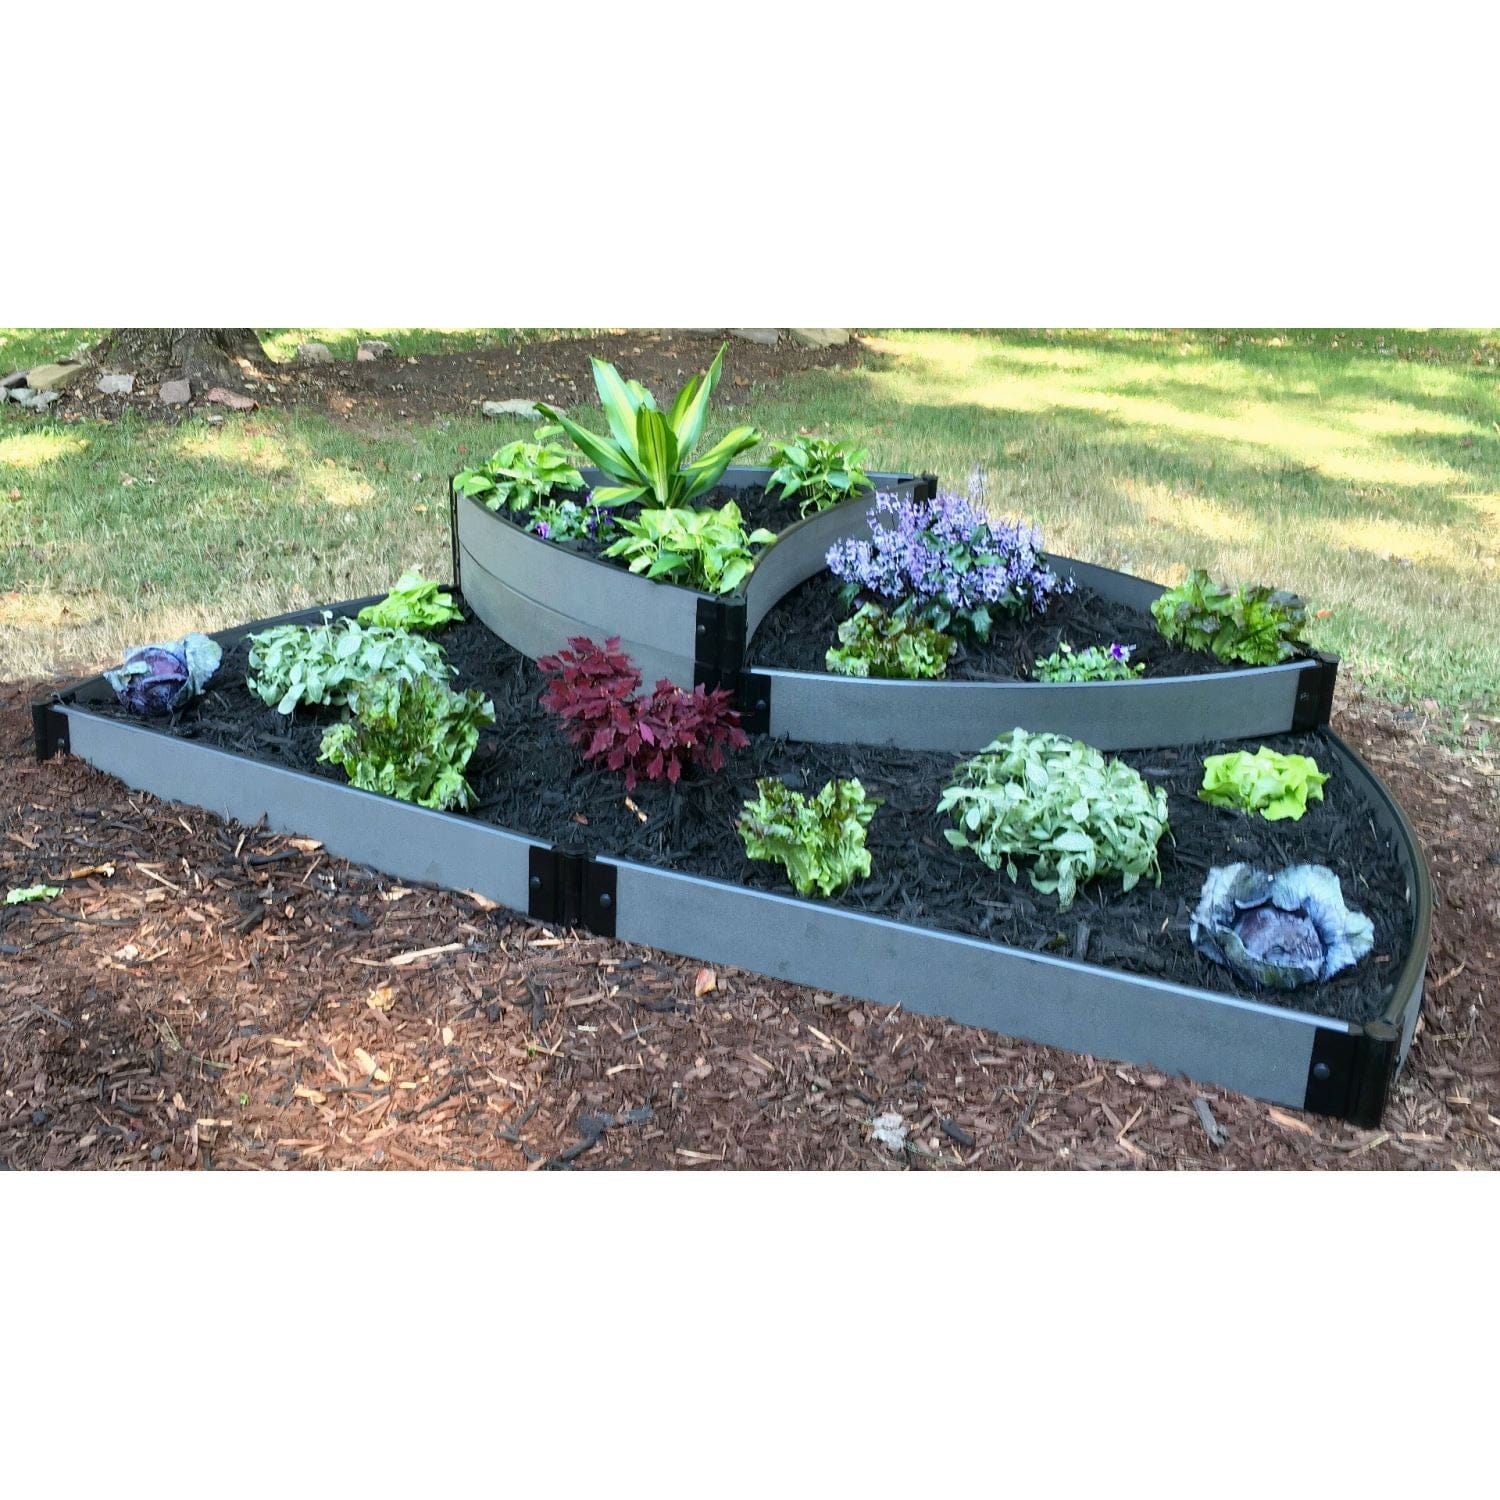 Frame It All Gardening Accessories Frame It All | Tool-Free Victory Cockade Semi Circle Raised Garden Bed (3 Tier Terrace) 6' X 8' X 16.5" - Classic Sienna